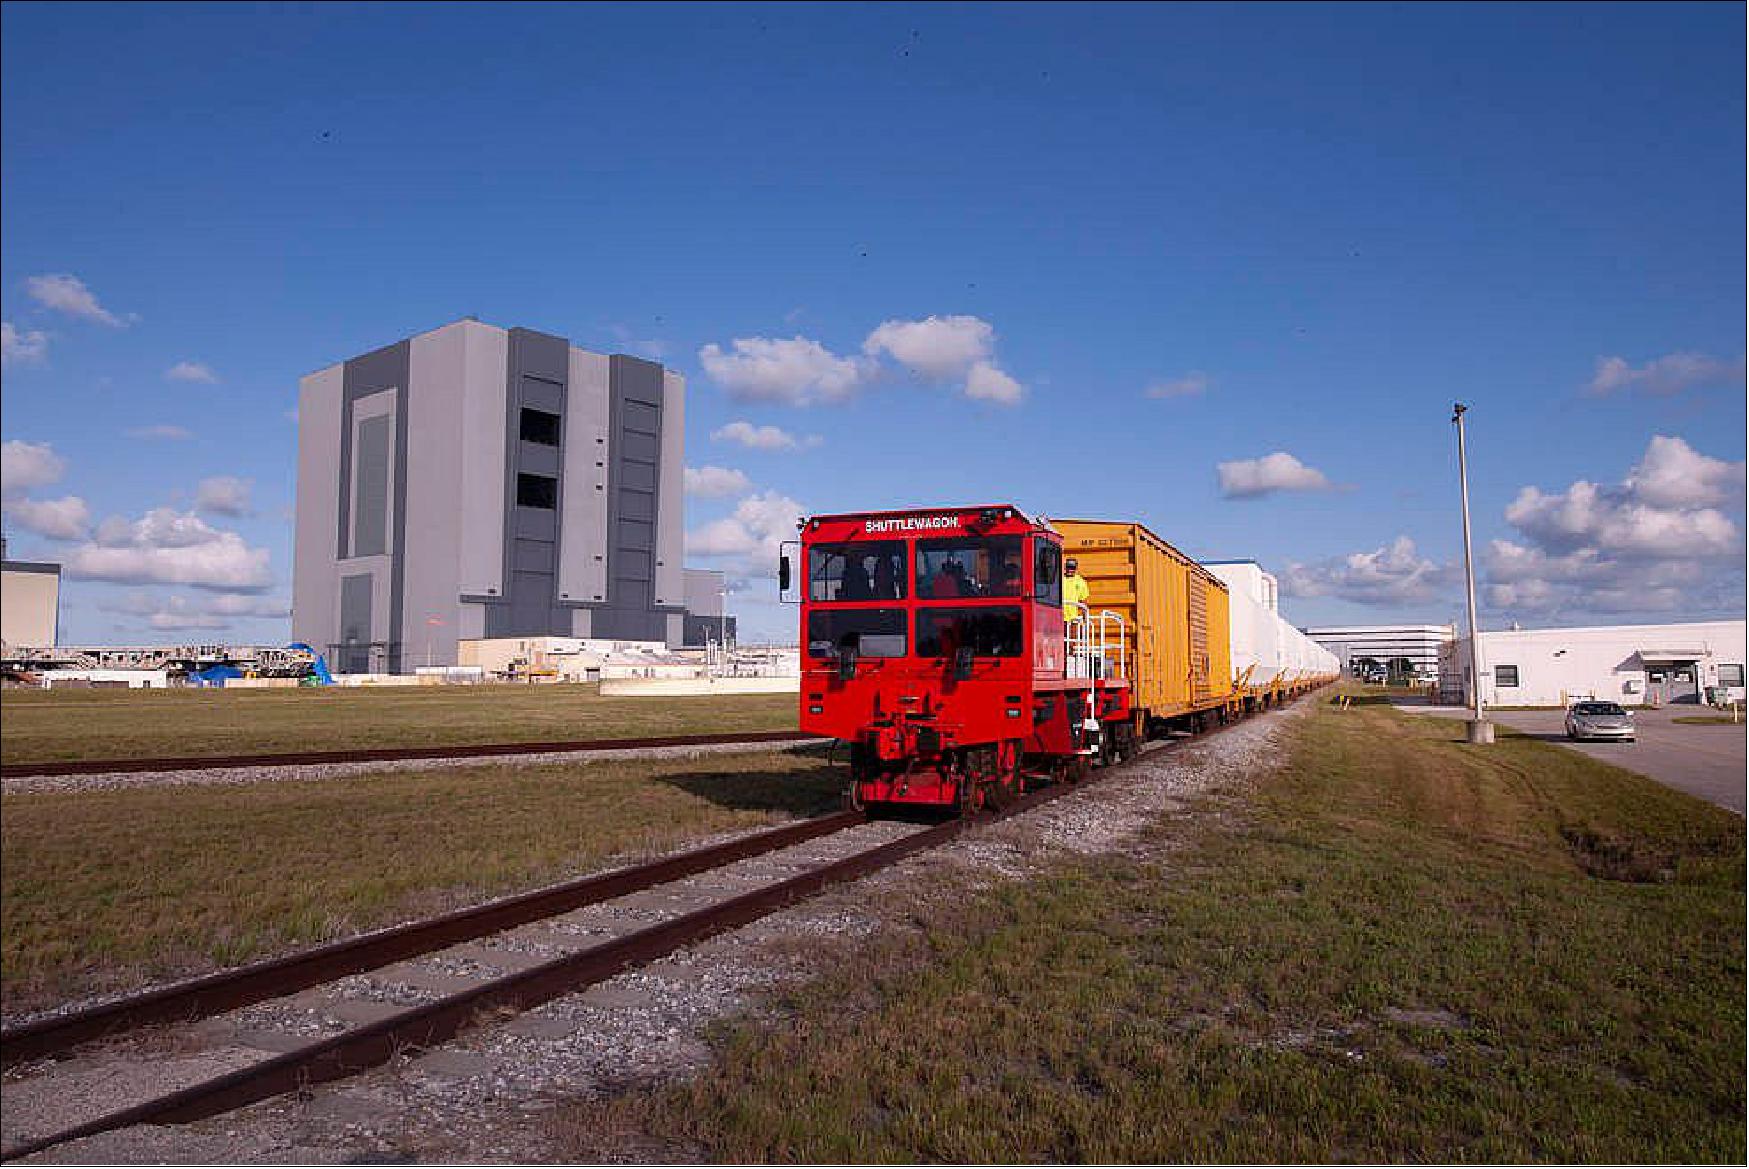 Figure 41: Twin rocket boosters for NASA’s Space Launch System (SLS) that will power Artemis missions to the Moon have arrived at the agency’s Kennedy Space Center in Florida. The two motor segments, each comprised of five segments, arrived at Kennedy’s Rotation, Processing and Surge Facility (RPSF) on June 15, 2020, by train from a Northrop Grumman manufacturing facility in Promontory, Utah. The booster segments will remain in the RPSF for inspection prior to processing until it’s time to move them to the Vehicle Assembly Building for stacking on the mobile launcher. This is the first piece of flight hardware to arrive at Kennedy by train for the Artemis program, but NASA’s Exploration Ground Systems (EGS) can expect to receive additional hardware soon, including the Launch Vehicle Service Adapter and the rocket’s core stage. NASA is working toward an Artemis I launch date in 2021, keeping the program moving at the best possible pace toward the earliest possible opportunity (image credit: NASA/Kevin O'Connell)